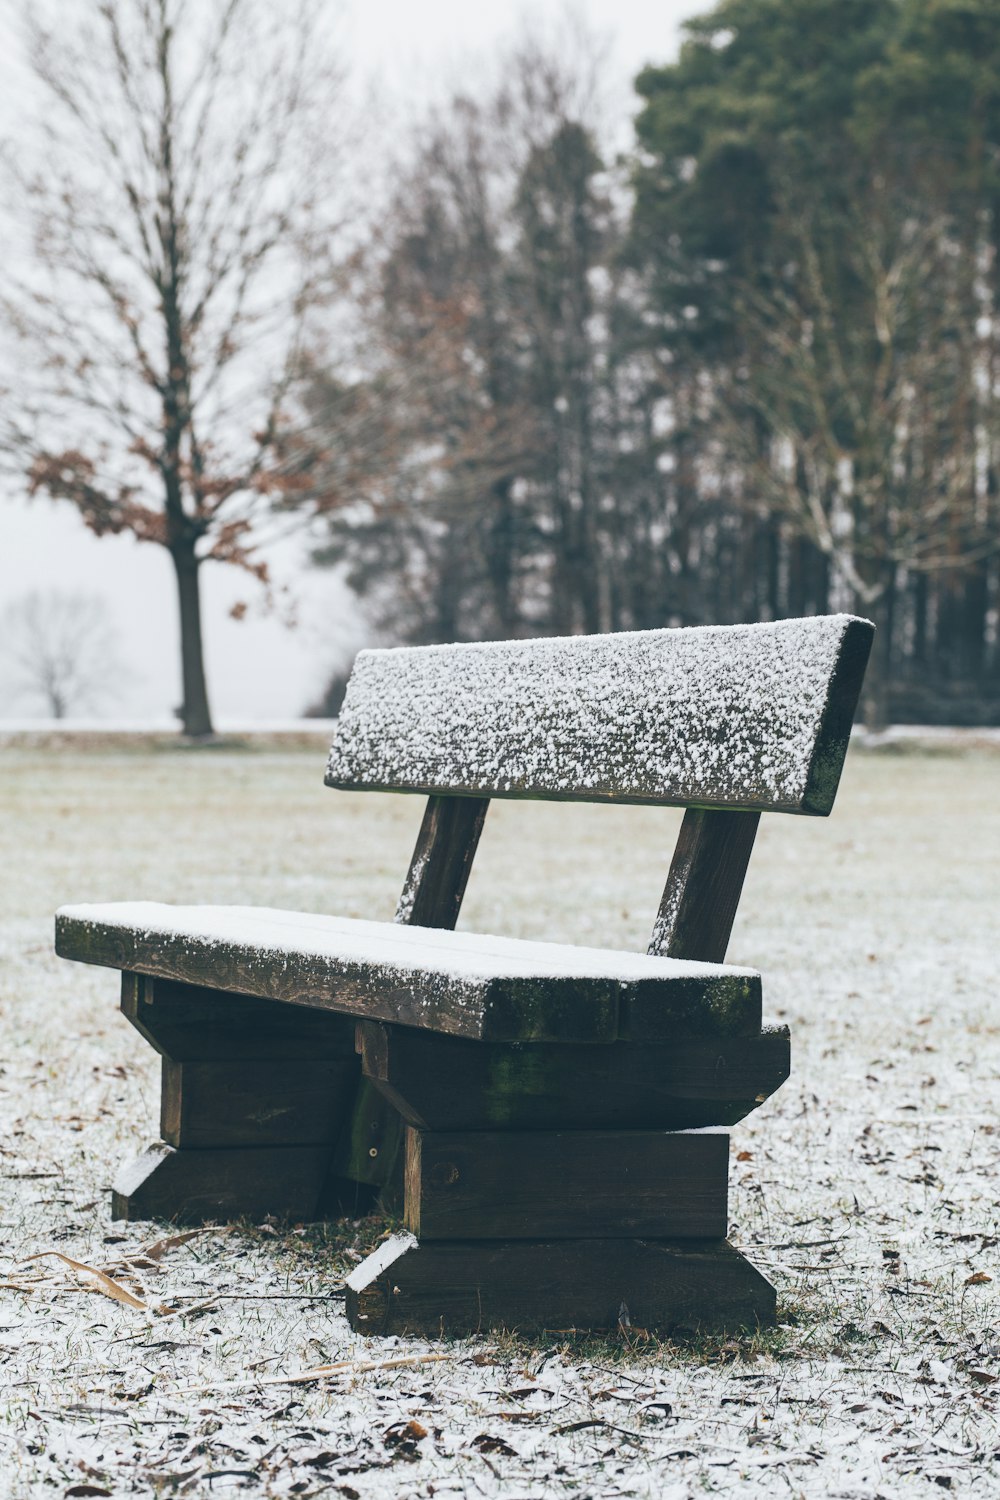 a bench sitting in the middle of a field covered in snow